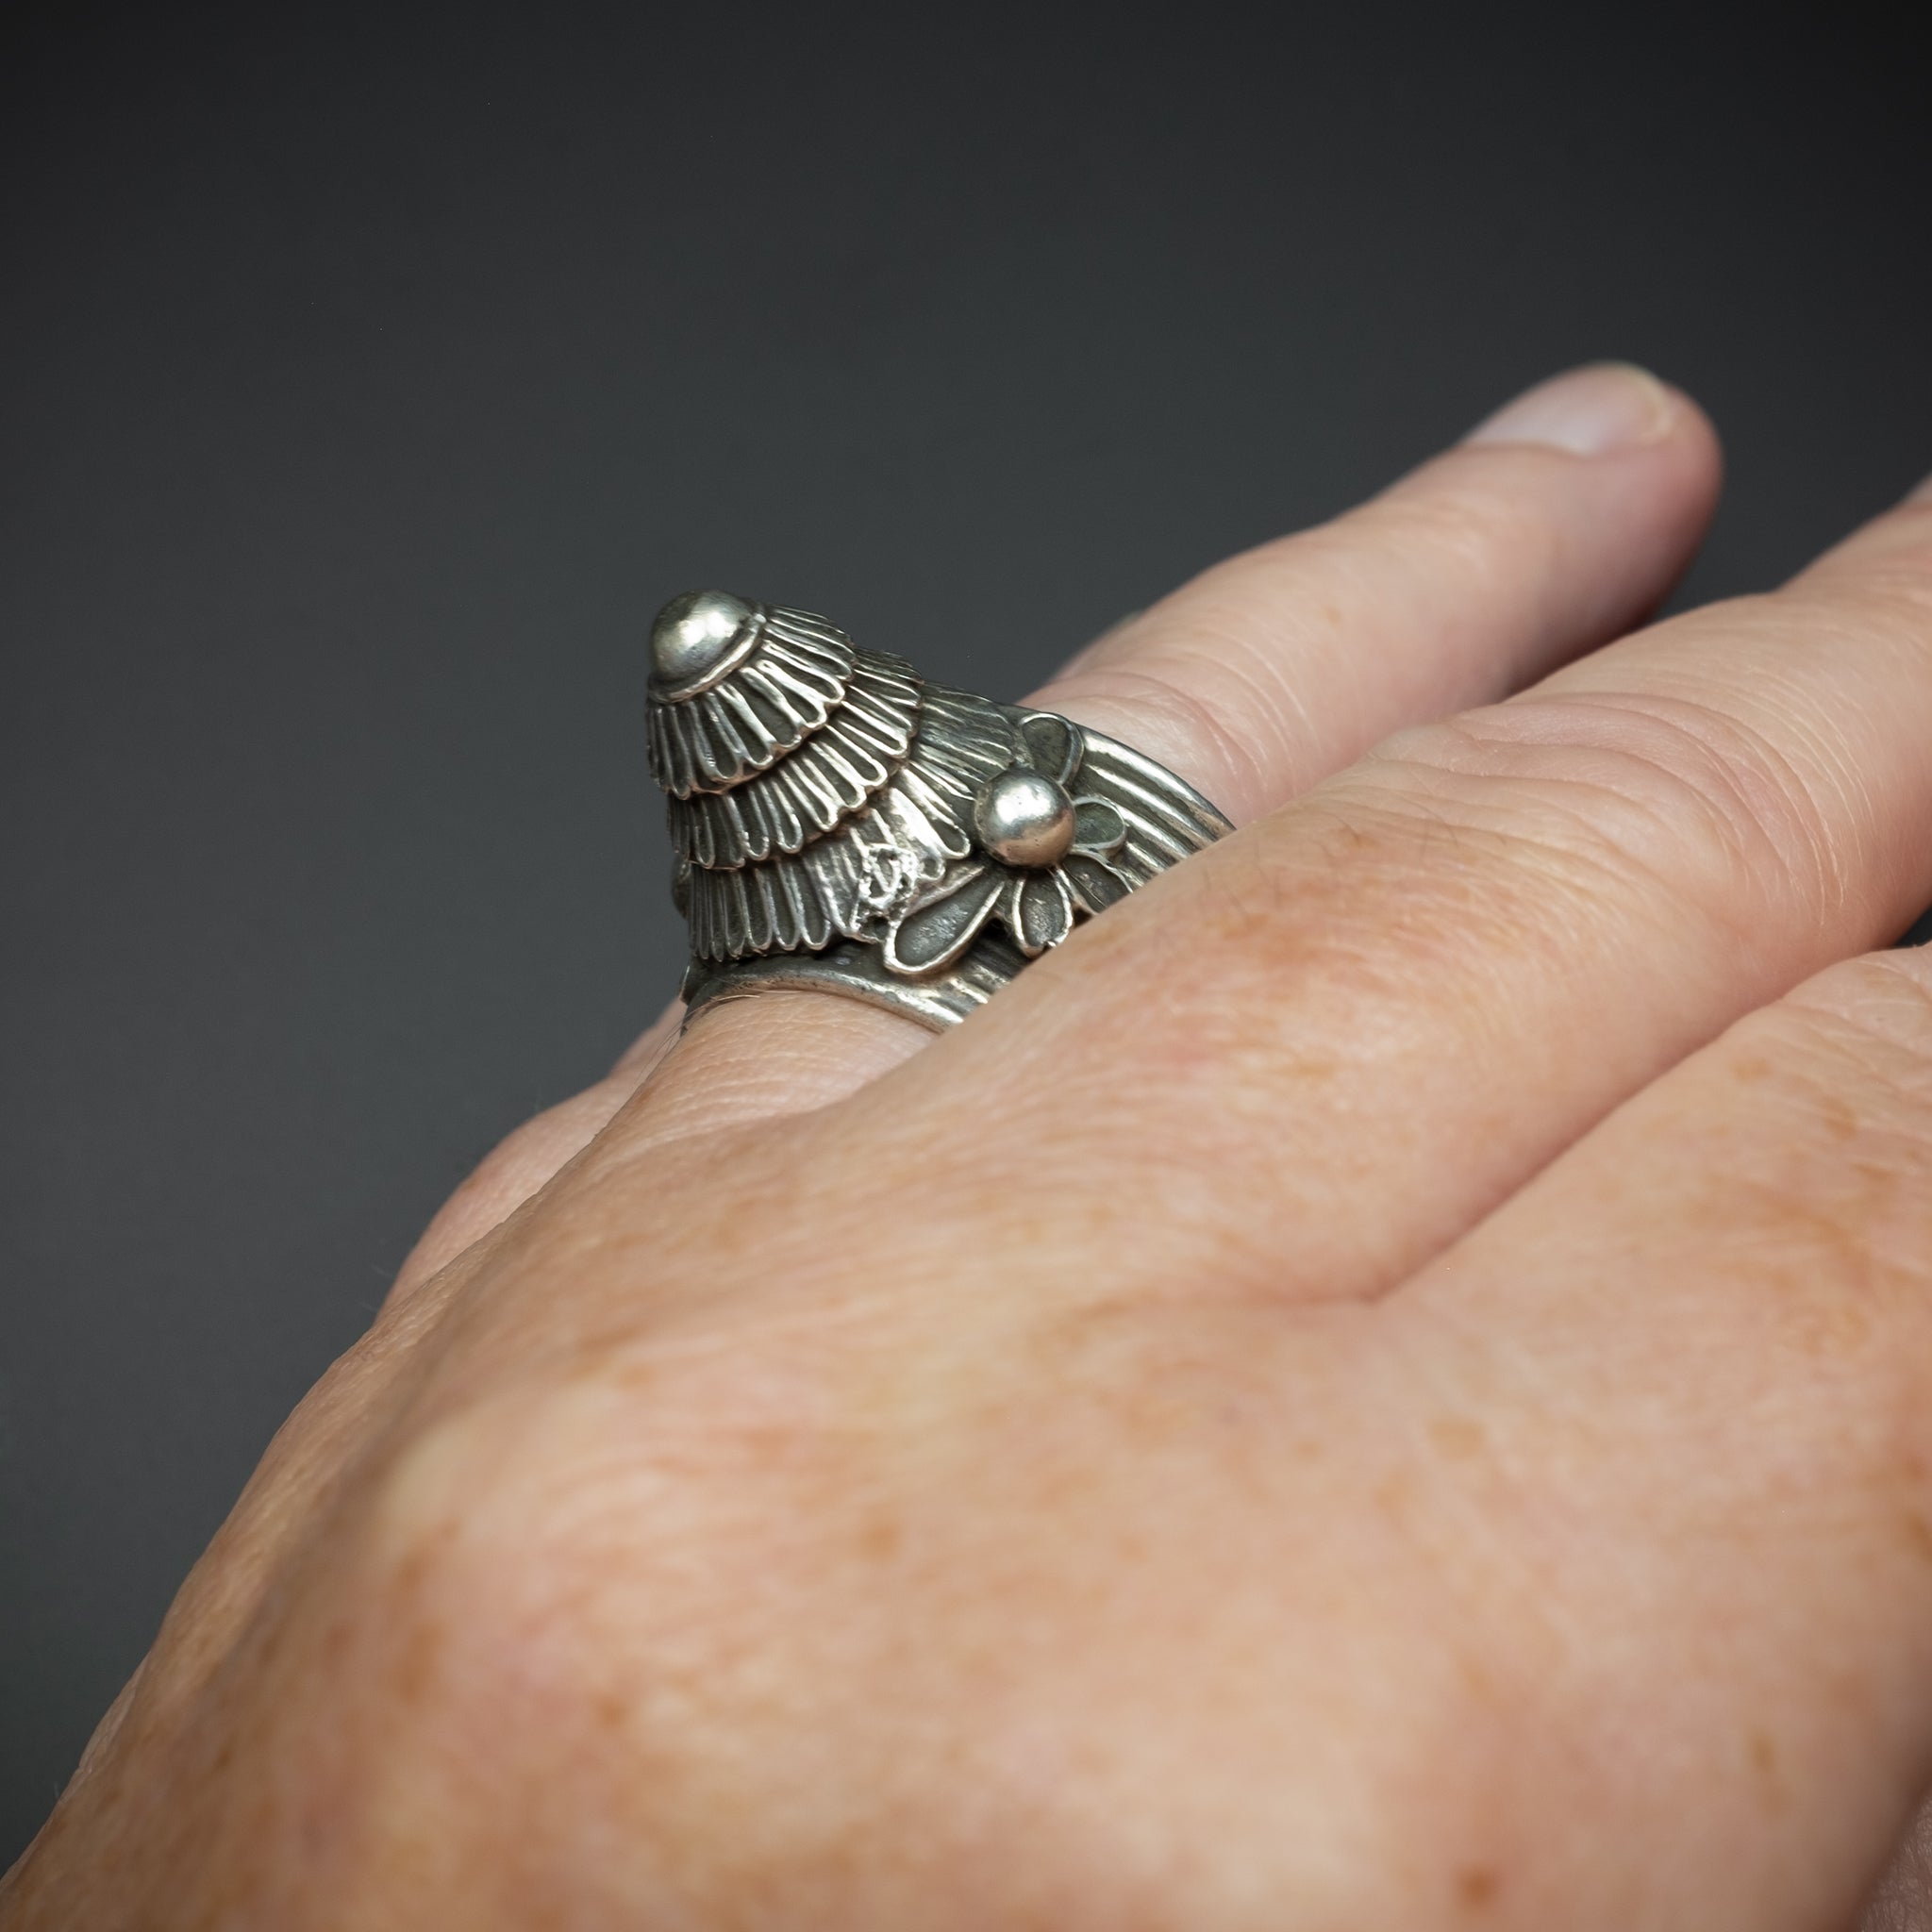 Antique Silver Crown Ring from The Golden Triangle, South-East Asia (Myanmar, Thailand or Laos)